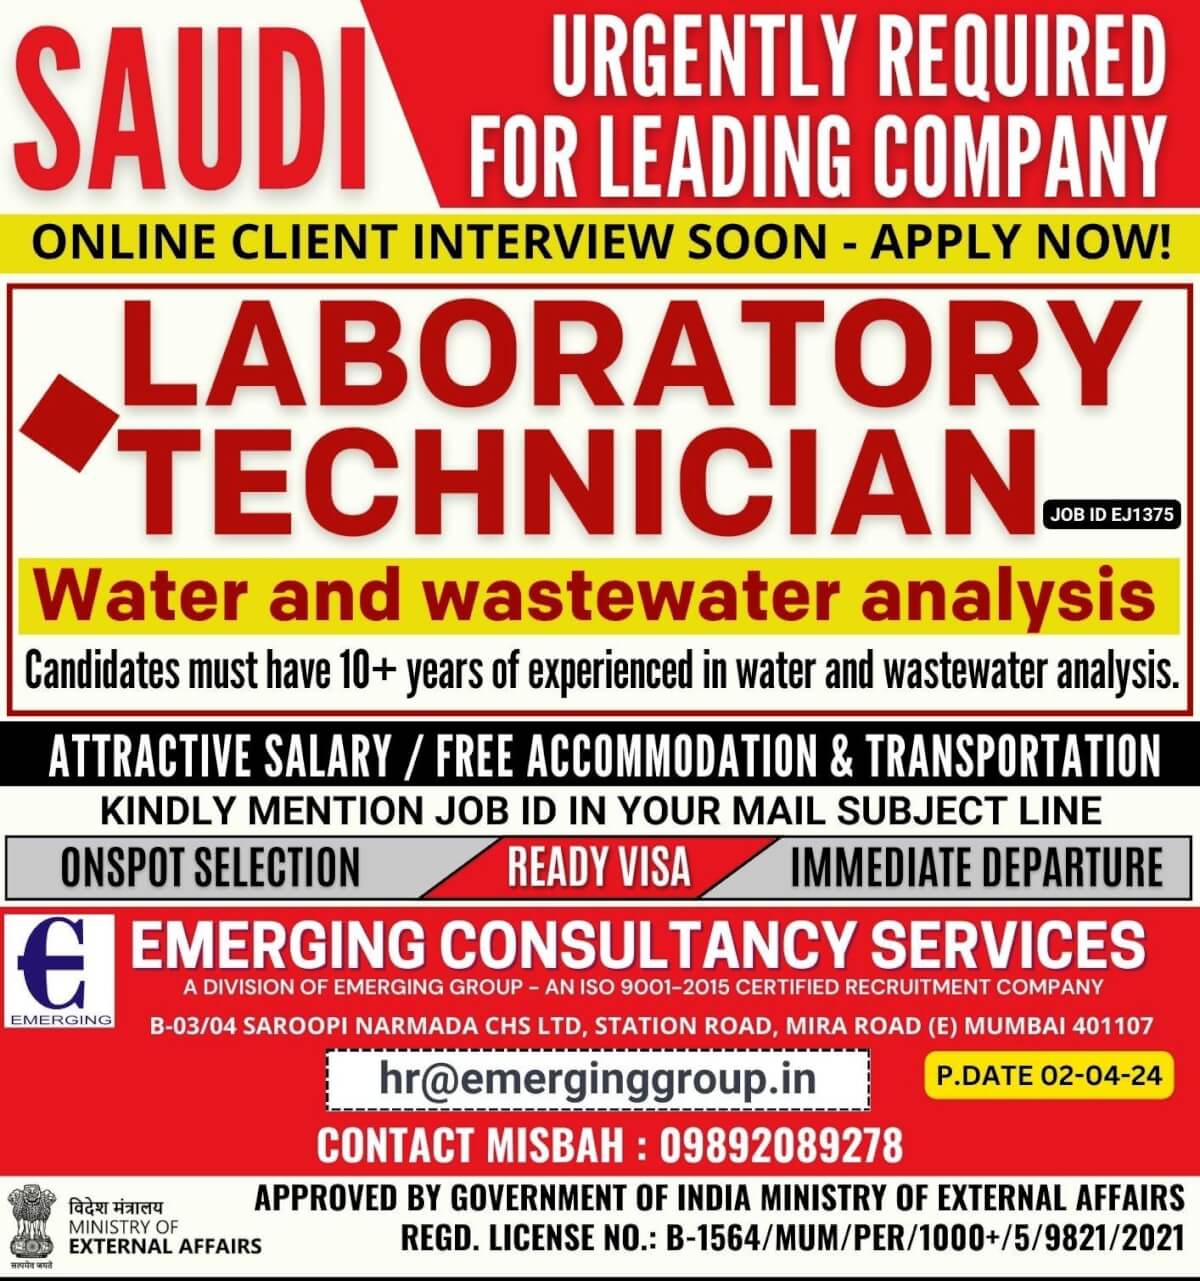 URGENTLY REQUIRED FOR LEADING COMPANY  IN SAUDI ARABIA - SHORTLISTING IN PROCESS